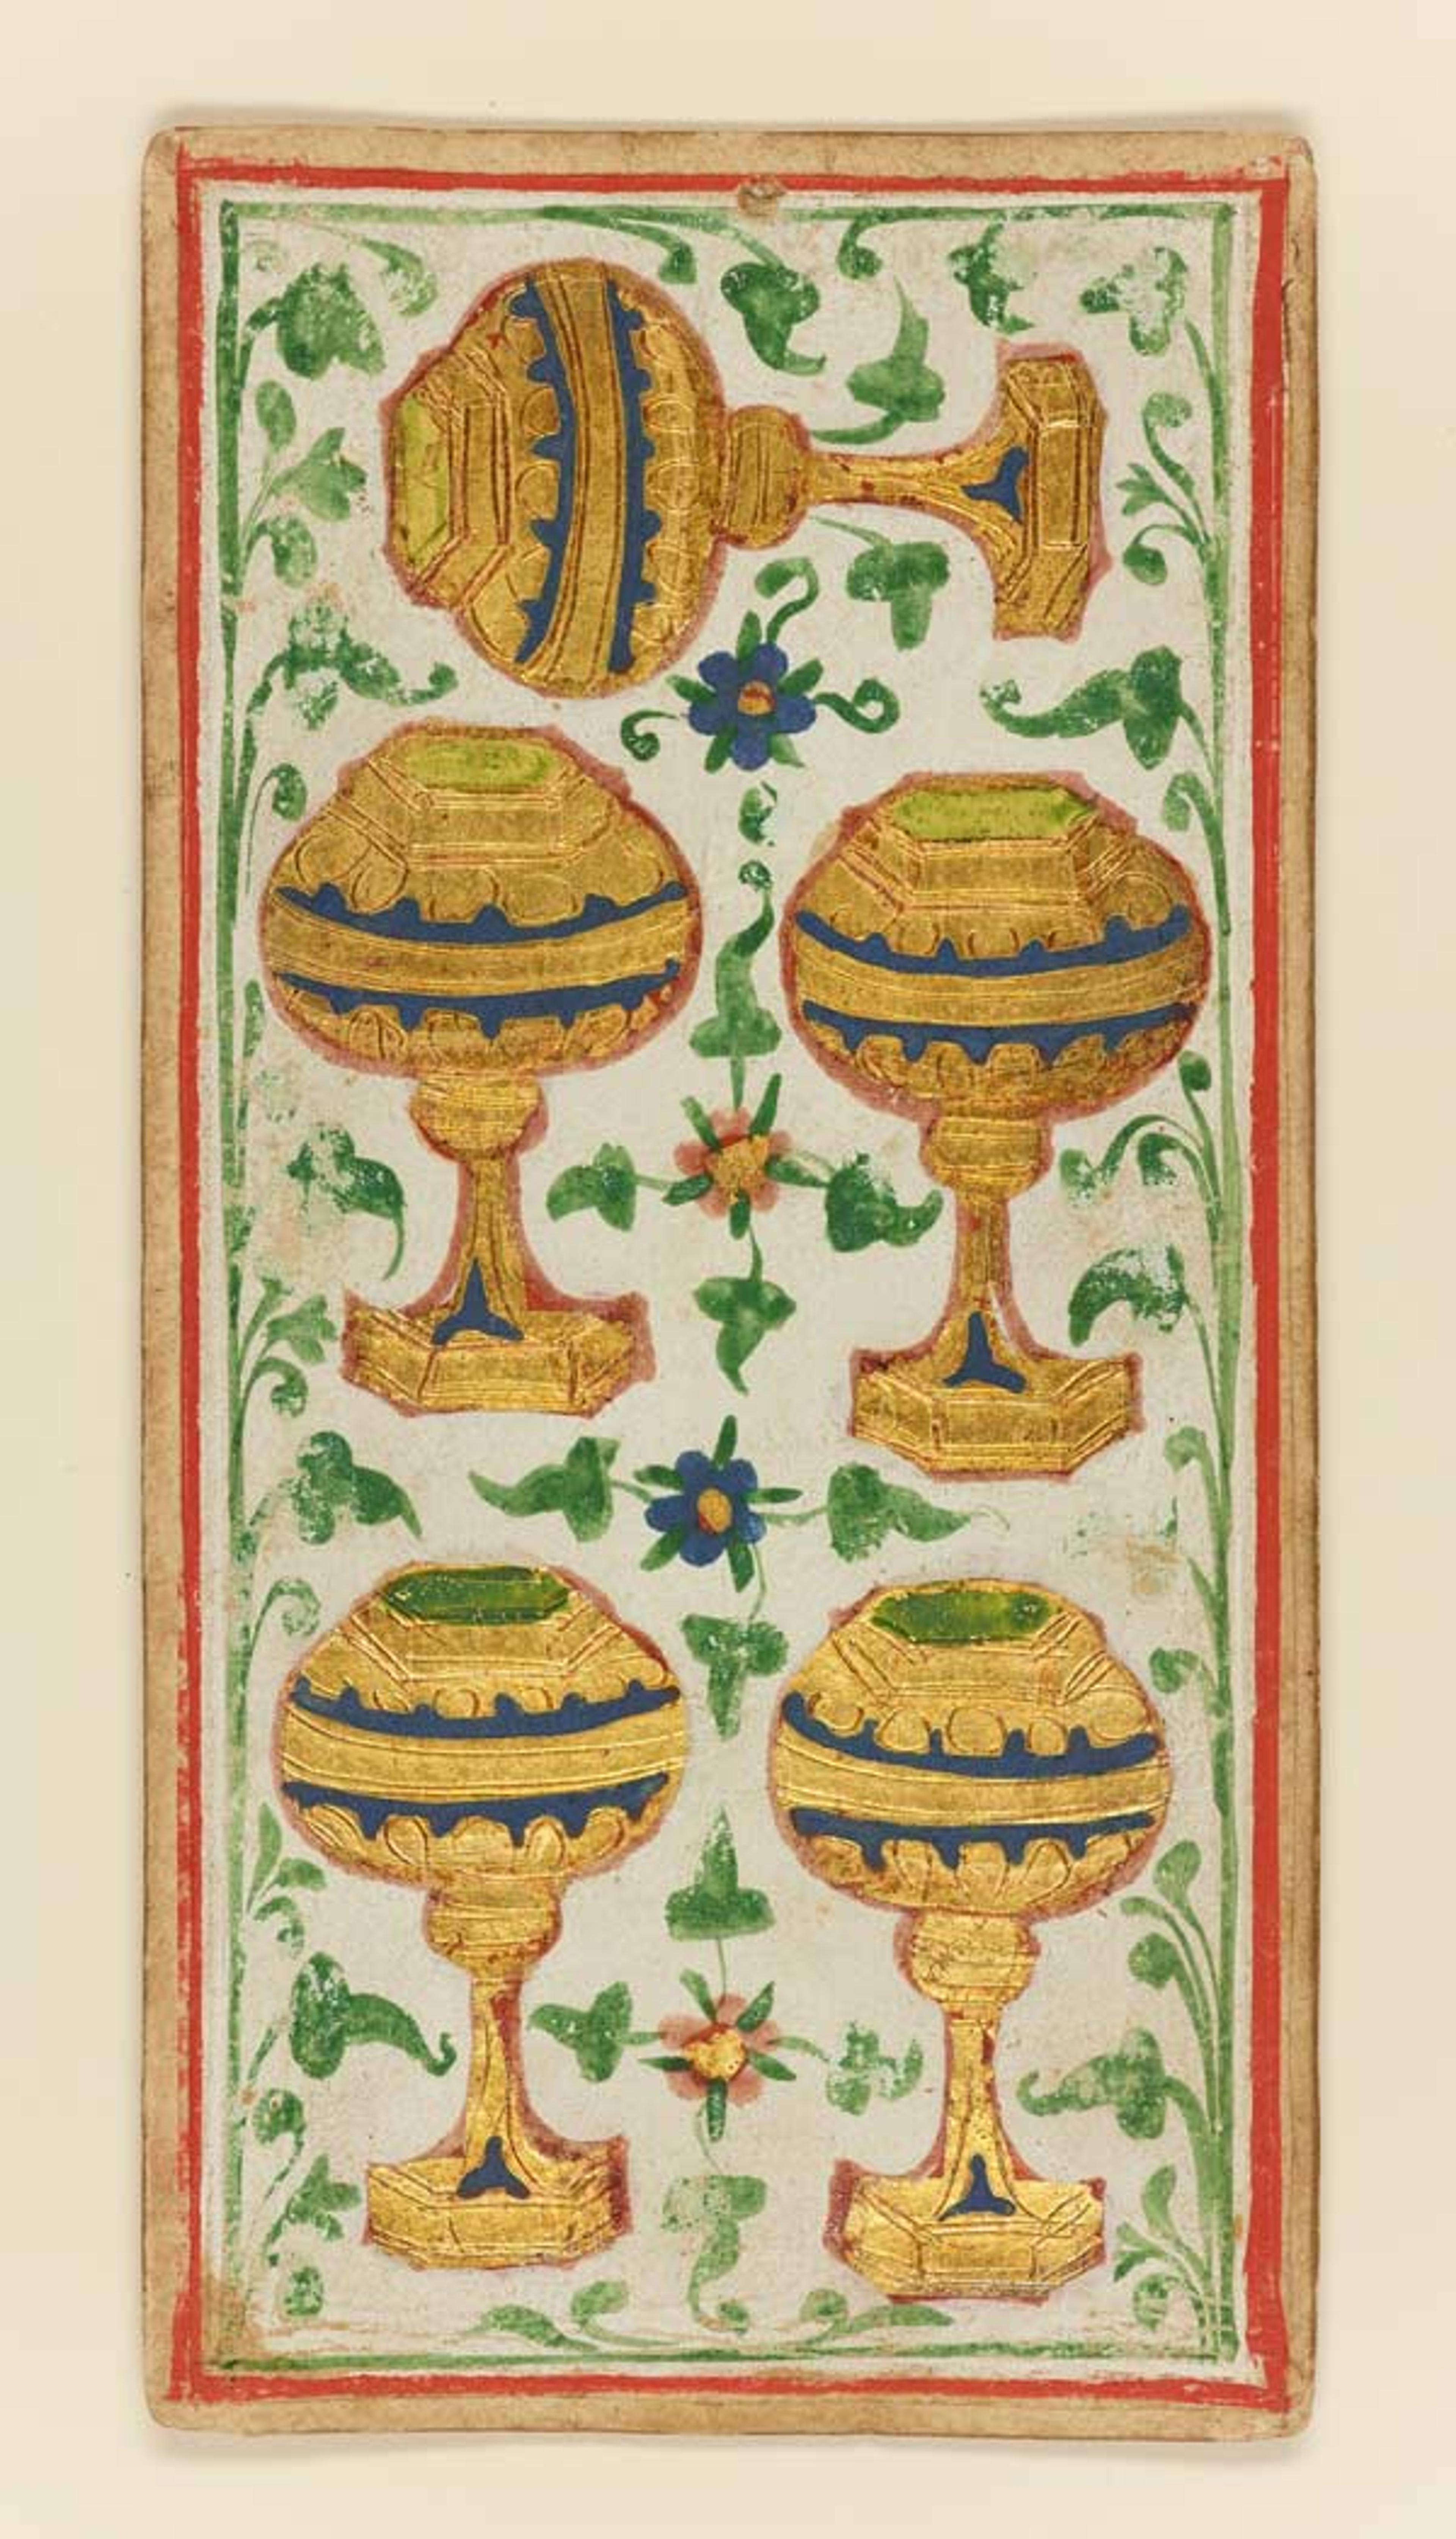 Workshop of Bonifacio Bembo (Italian, Cremonese, active by 1447/48–died before 1482). 5 of Cups from The Visconti-Sforza Tarot.